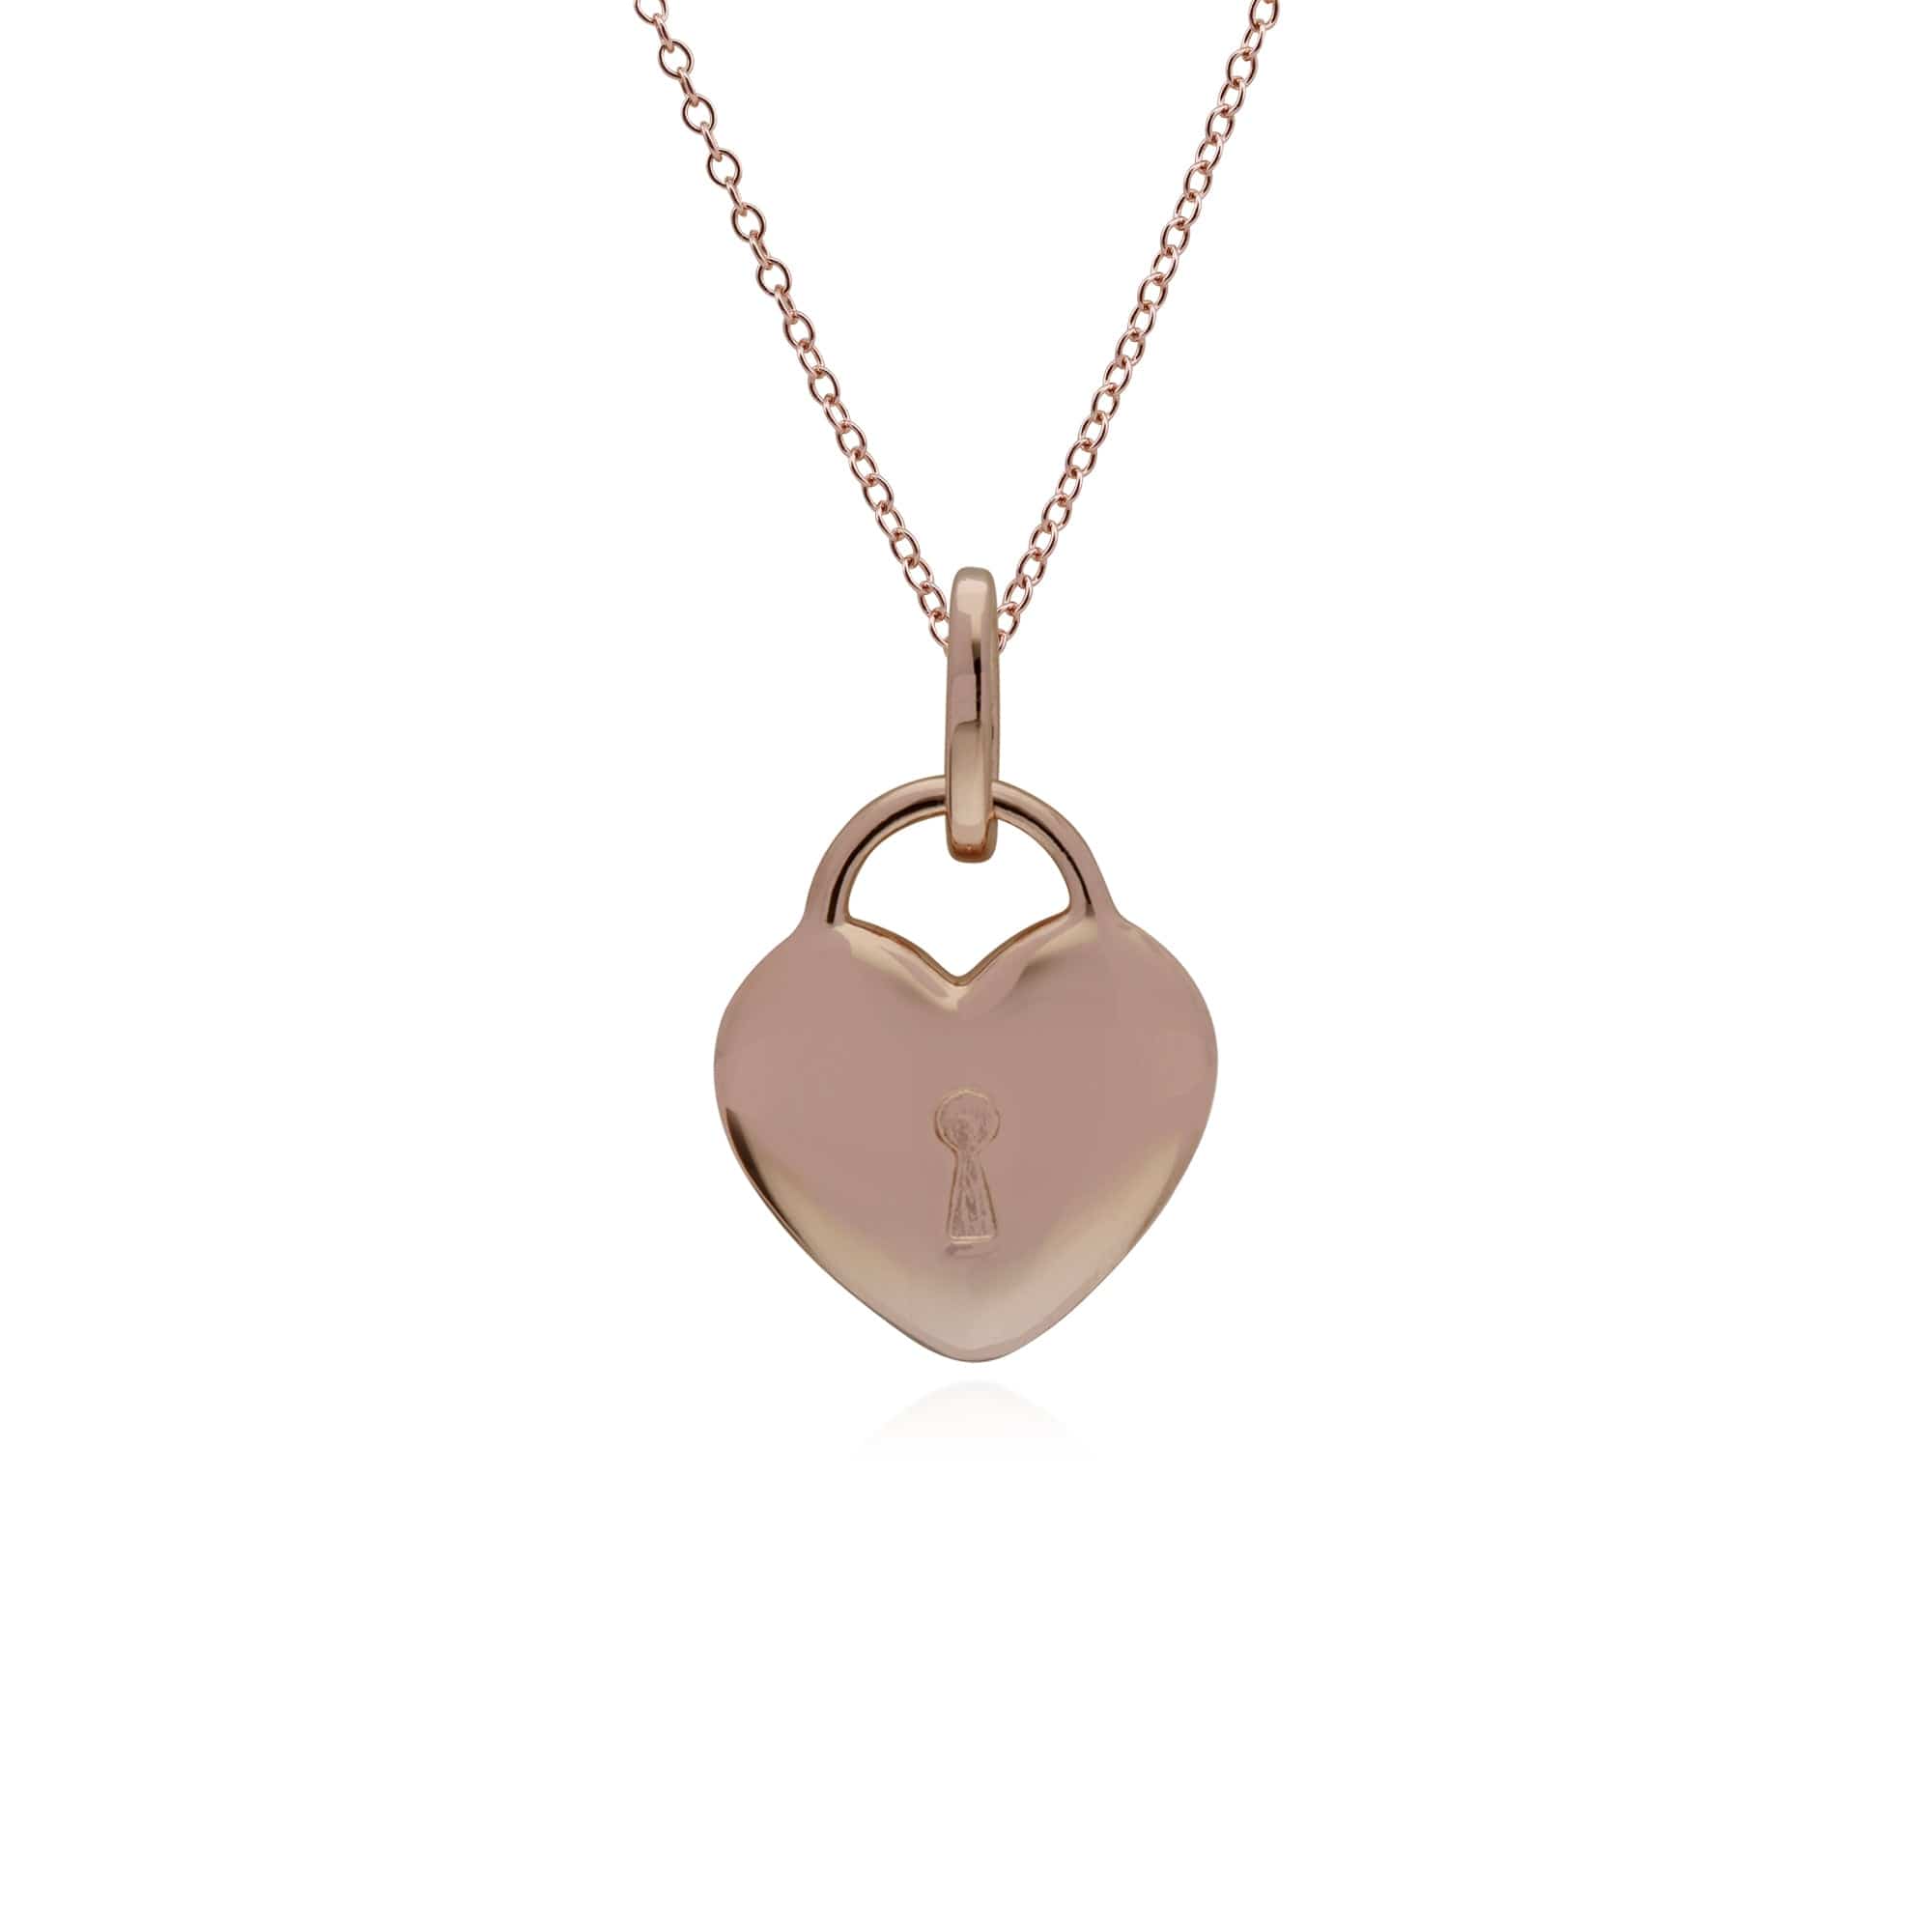 270P028501925-270P026901925 Classic Plain Heart Lock Pendant & Turquoise Charm in Rose Gold Plated 925 Sterling Silver 3